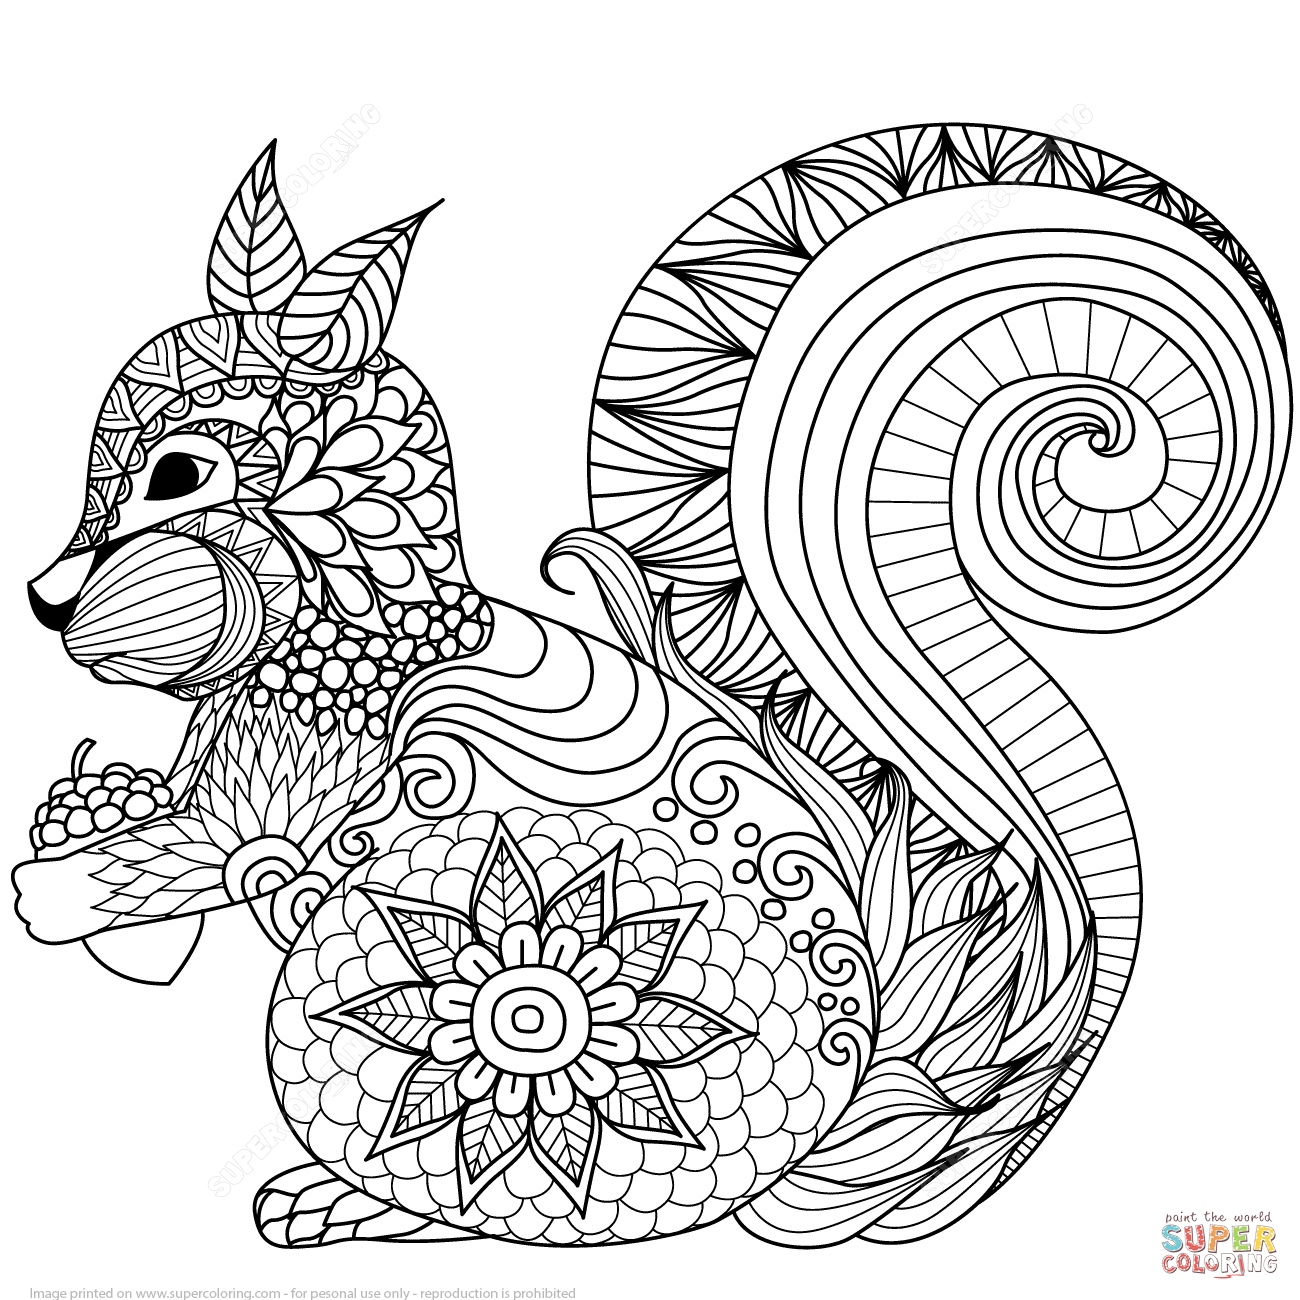 Zentangle Animal Coloring Pages at GetColorings.com | Free ...